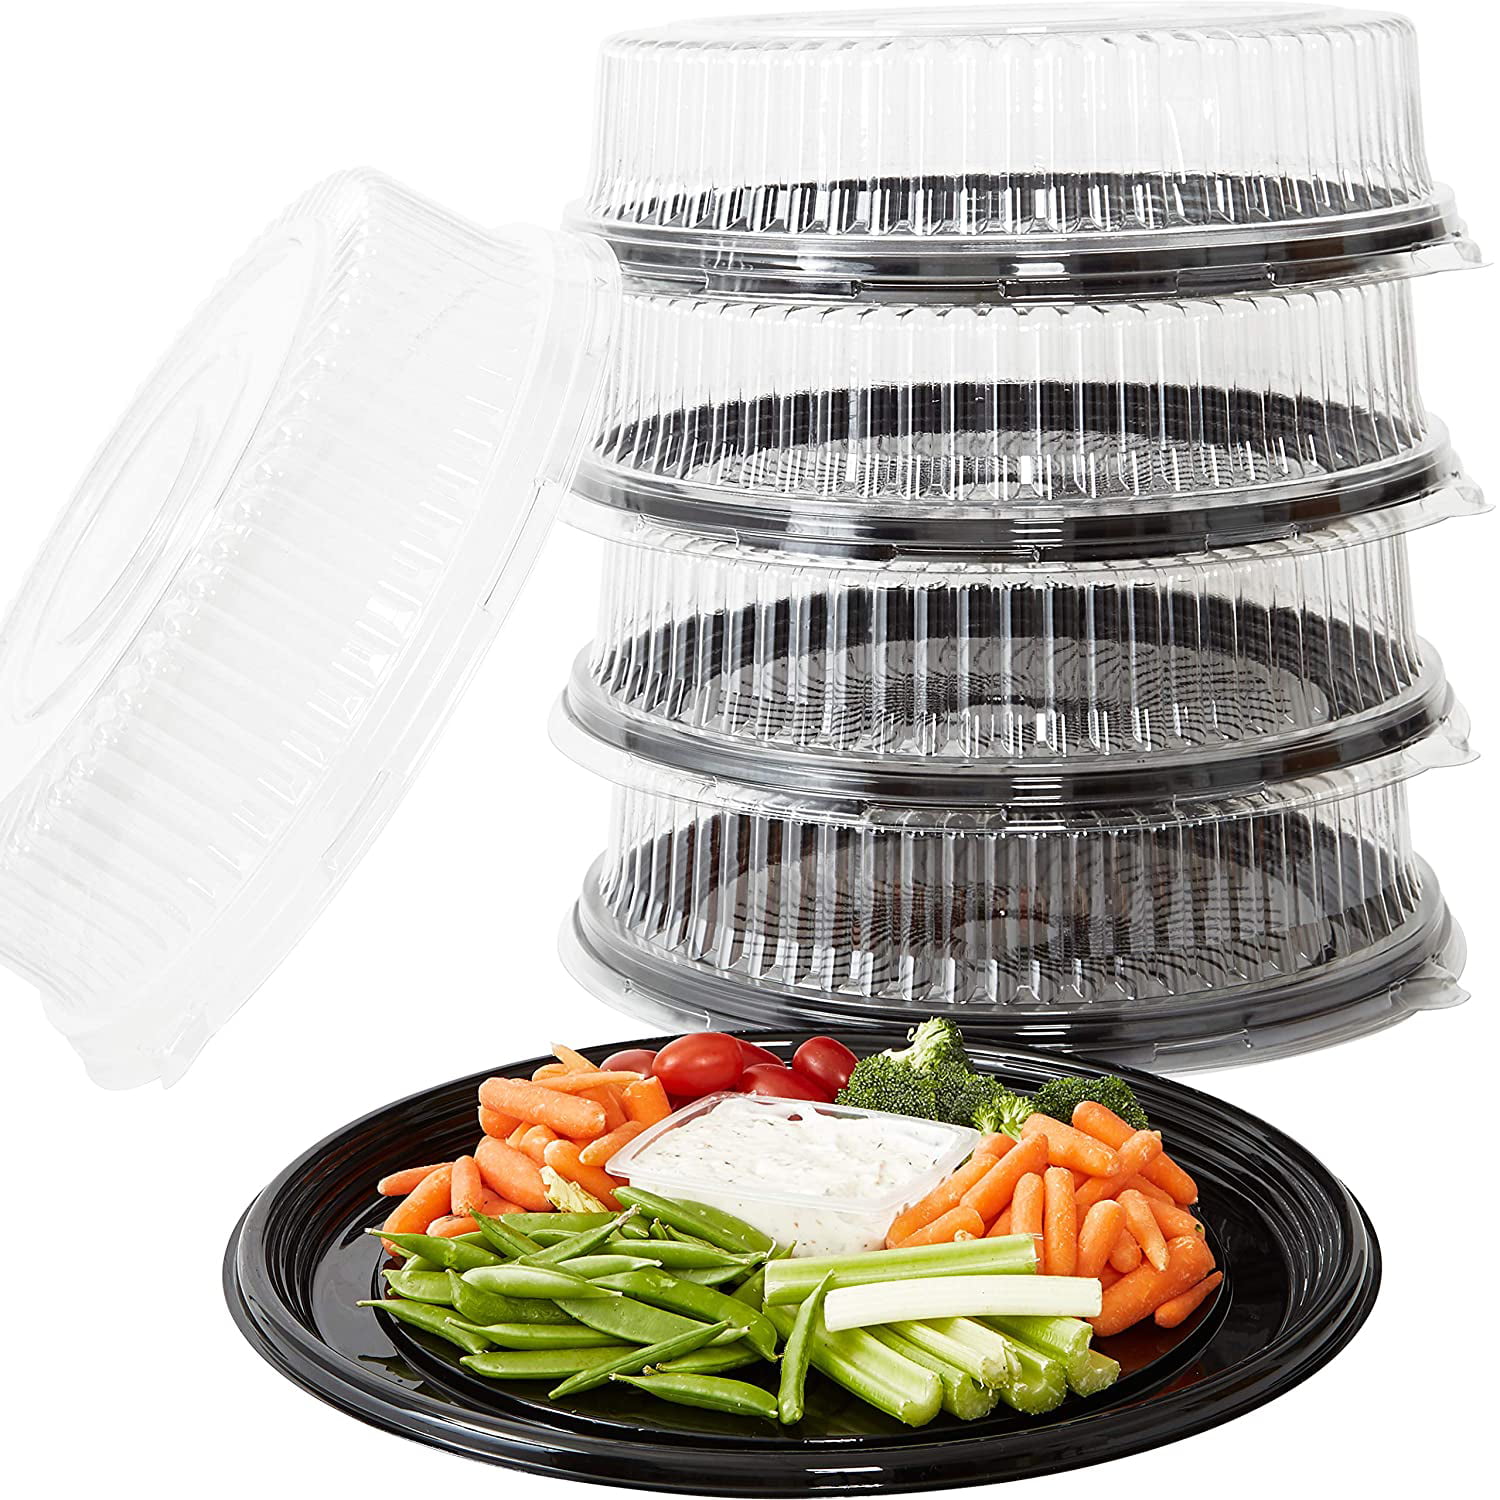 Raap bladeren op omverwerping vangst Heavy Duty, Recyclable 16 In. Serving Tray and Lid 5pk. Large, Black Plastic  Party Platters with Clear Lids. Elegant Round Banquet or Catering Trays for  Serving Appetizers, Sandwich and Veggie Plates -